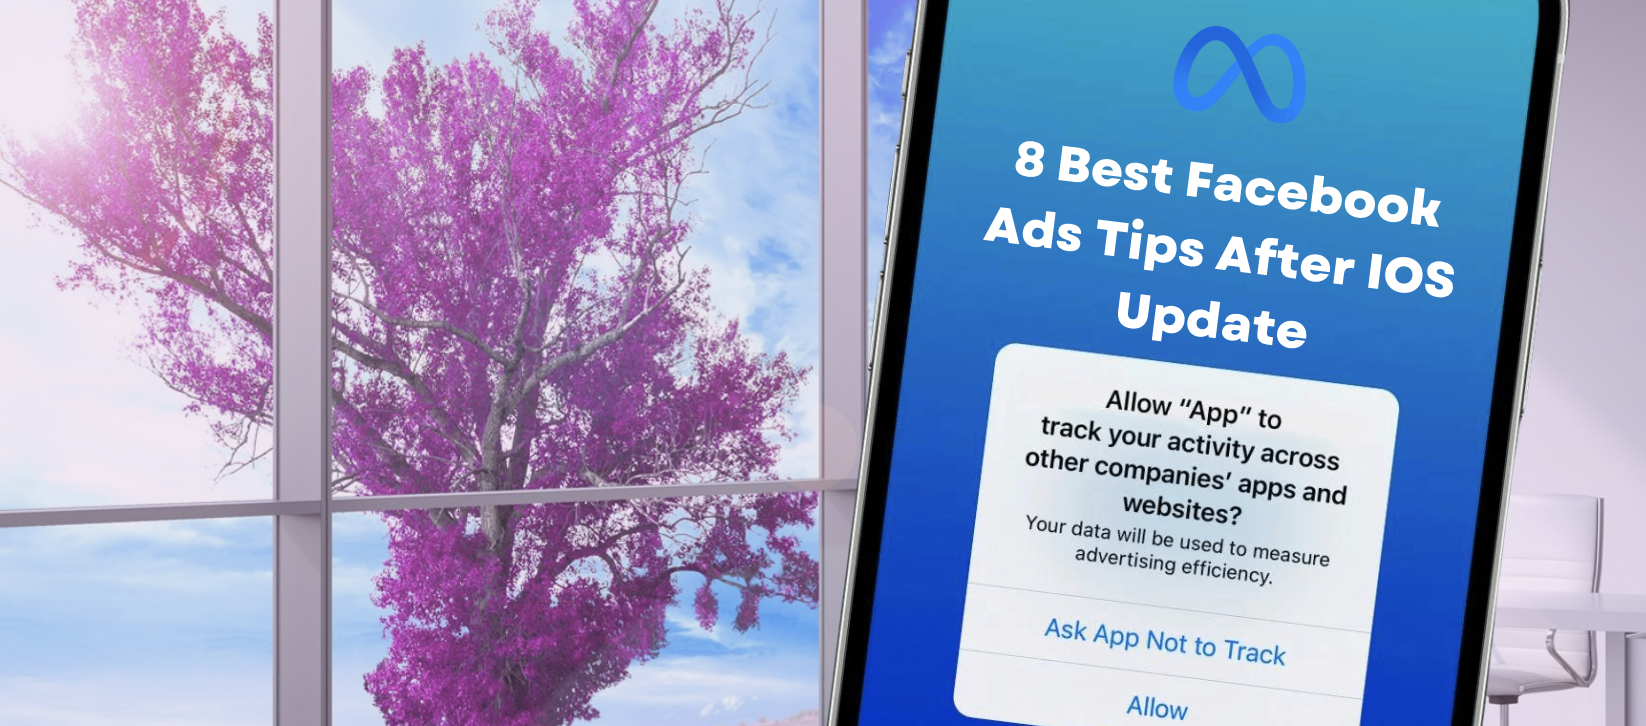 Best 8 Tips to Improve Your Facebook Ads After IOS Update